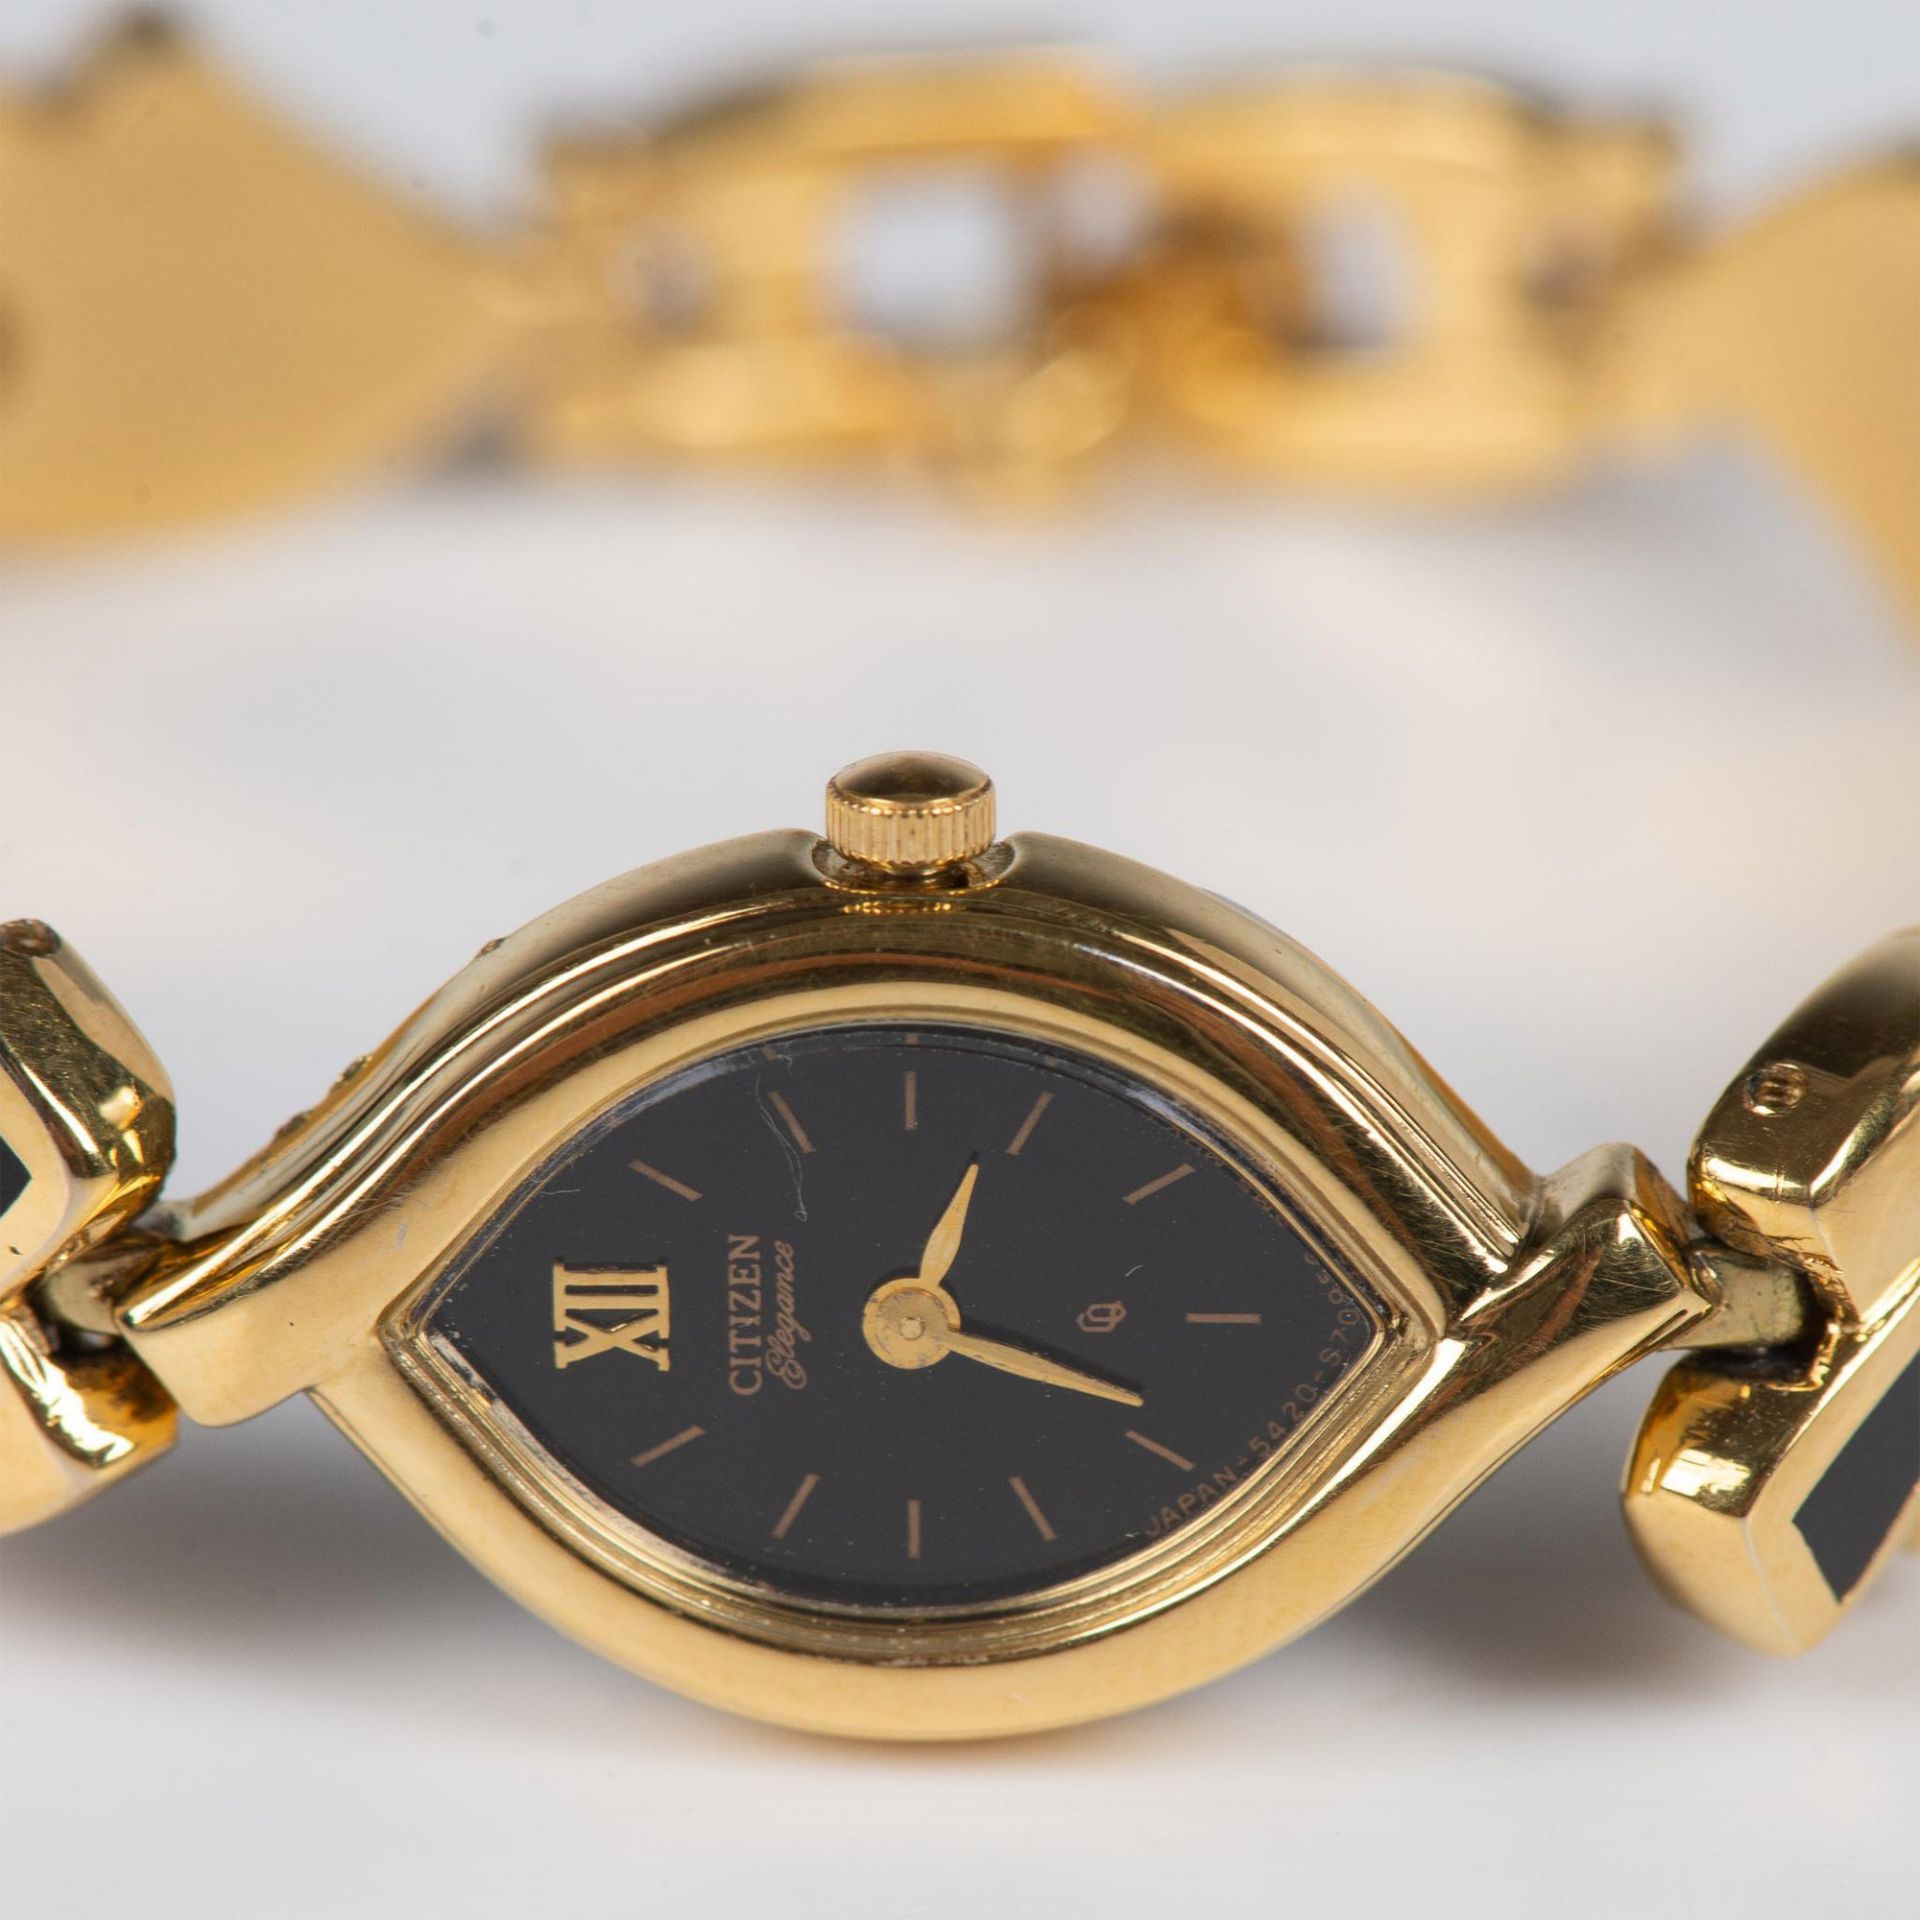 Citizen Elegance Series Fancy Gold and Black Enamel Watch - Image 2 of 8